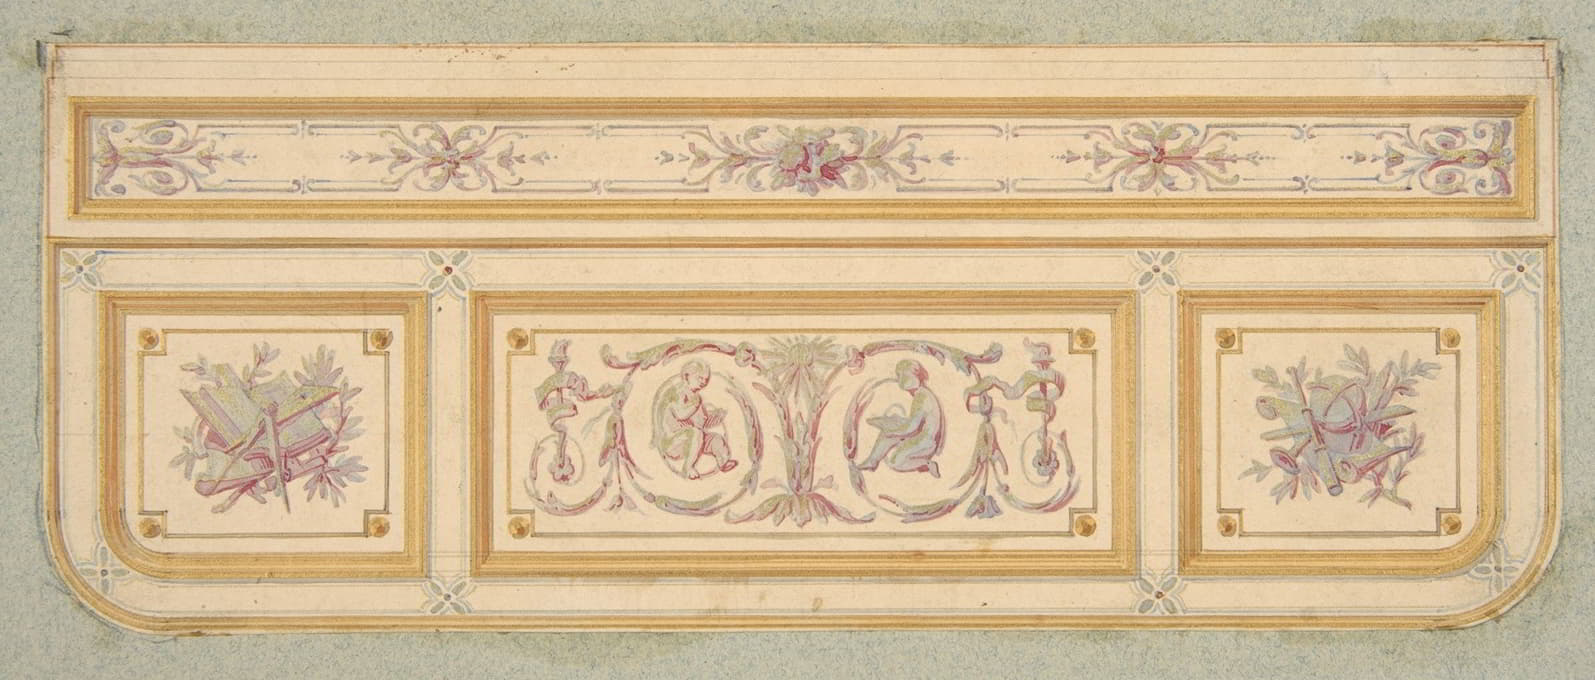 Jules-Edmond-Charles Lachaise - Design for a ceiling with two putti and symbols for the arts